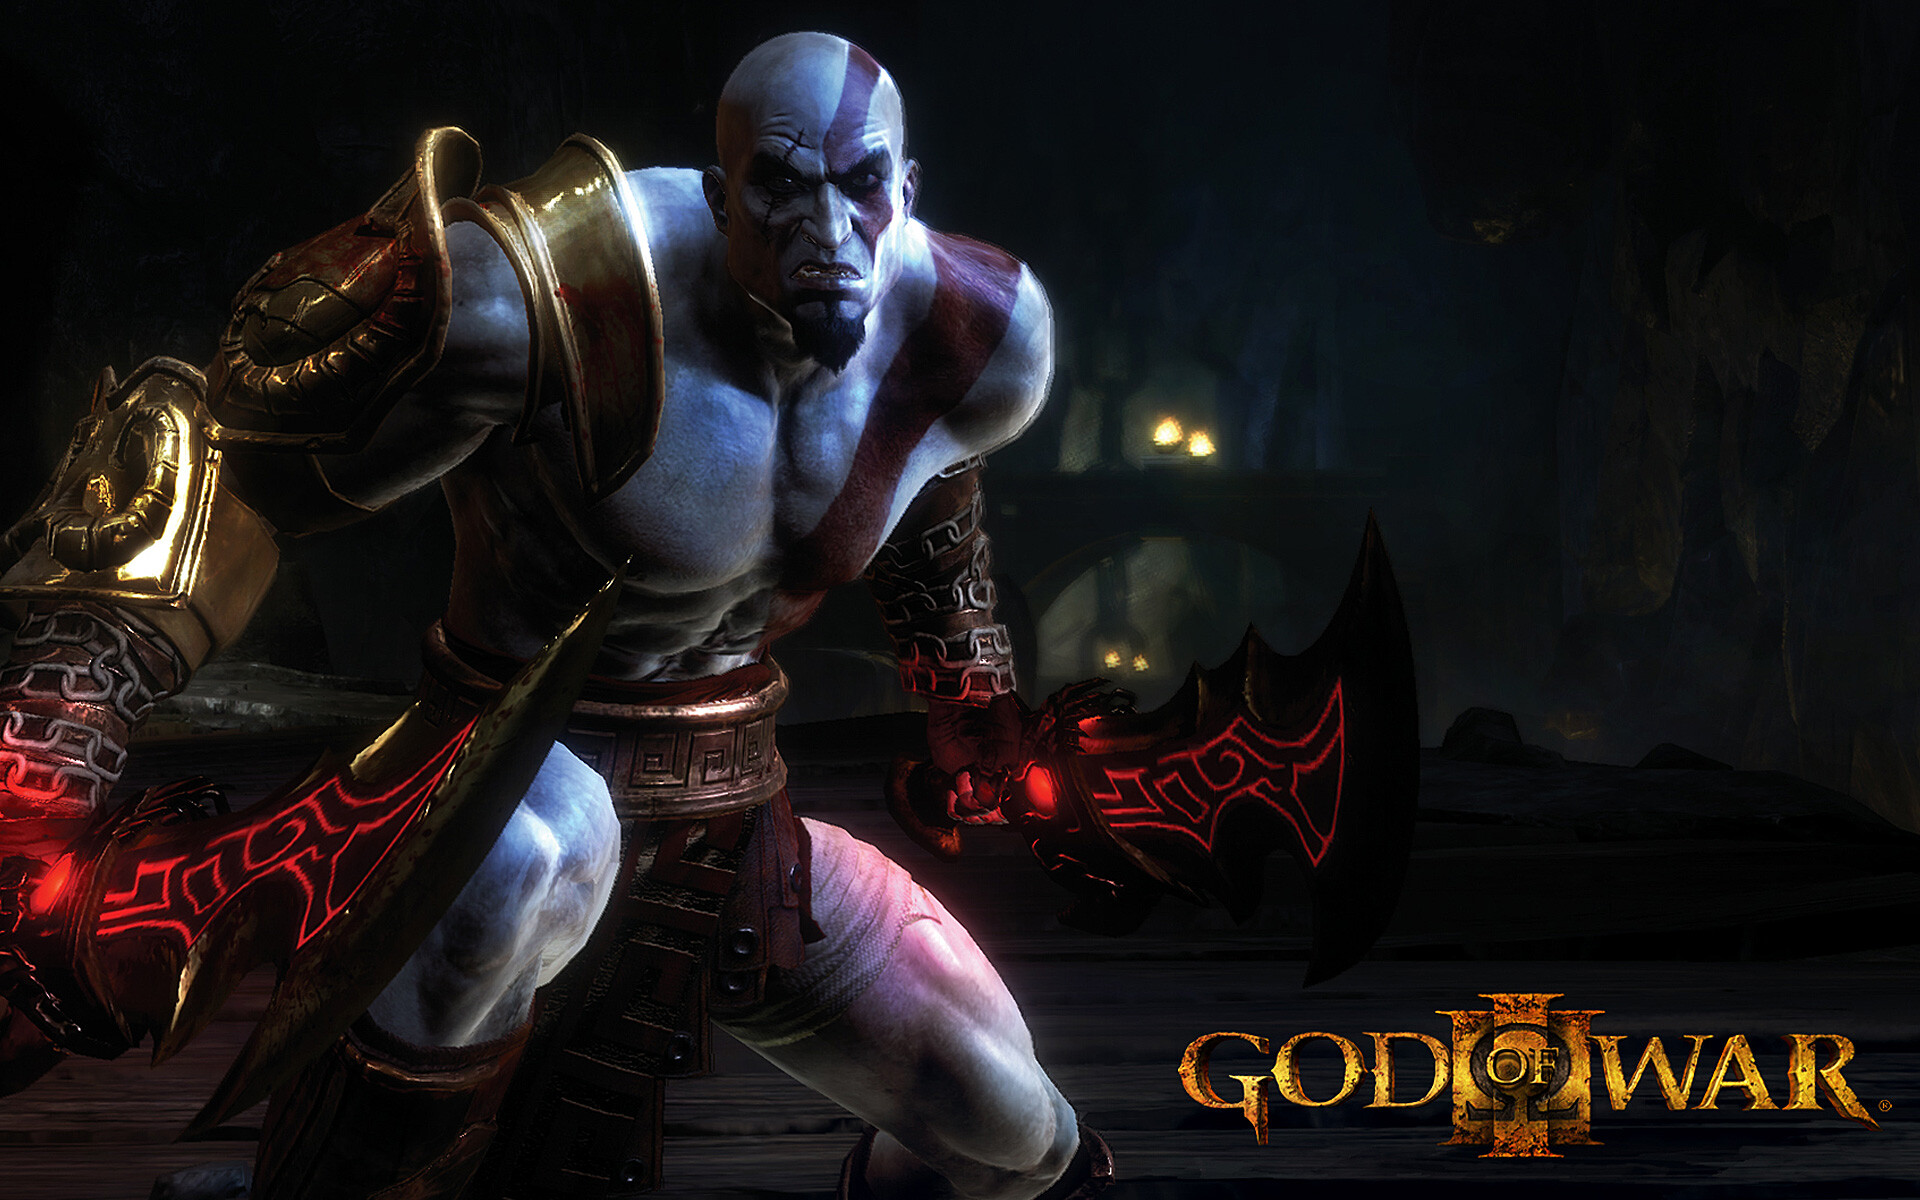 God of War: He is usually portrayed as being oblivious to all else and is stoic, bloodthirsty, and arrogant in nature, often engaging in morally ambiguous activities and performing acts of extreme violence, Action-adventure game. 1920x1200 HD Wallpaper.